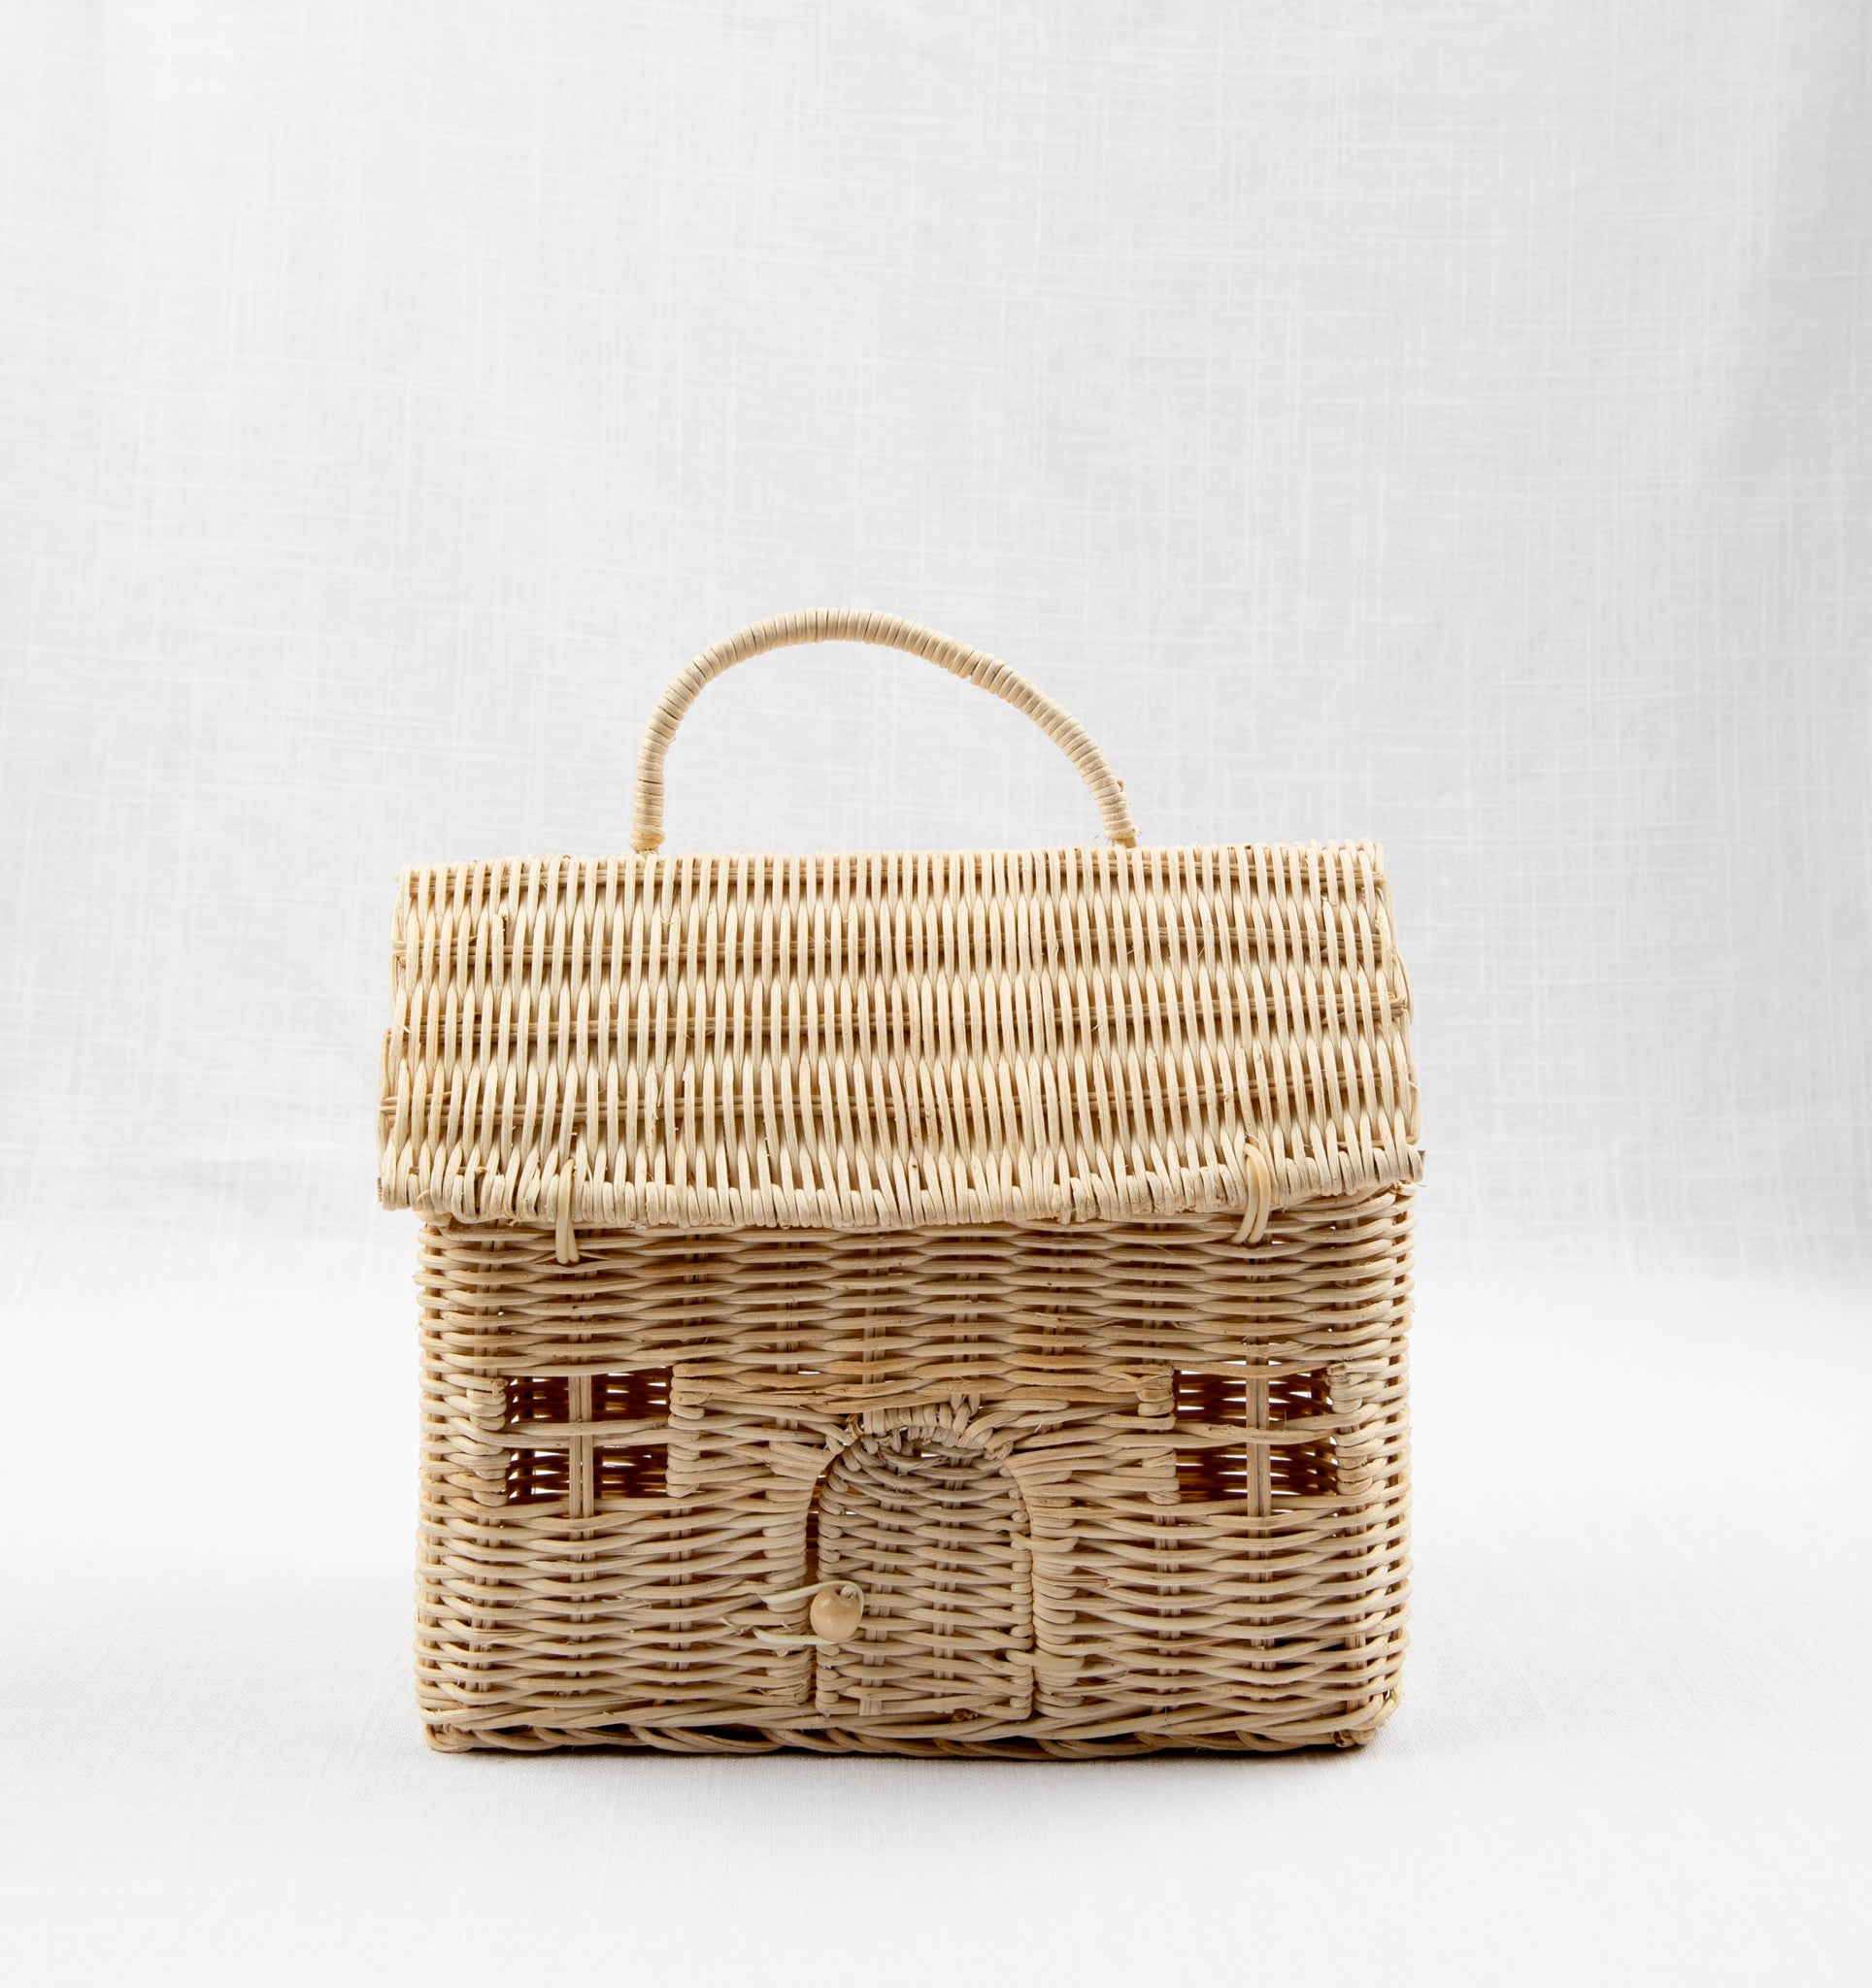 Crabtree & Evelyn small wicker basket purse. Great condition. 6 1/2” x 9  1/2” | eBay